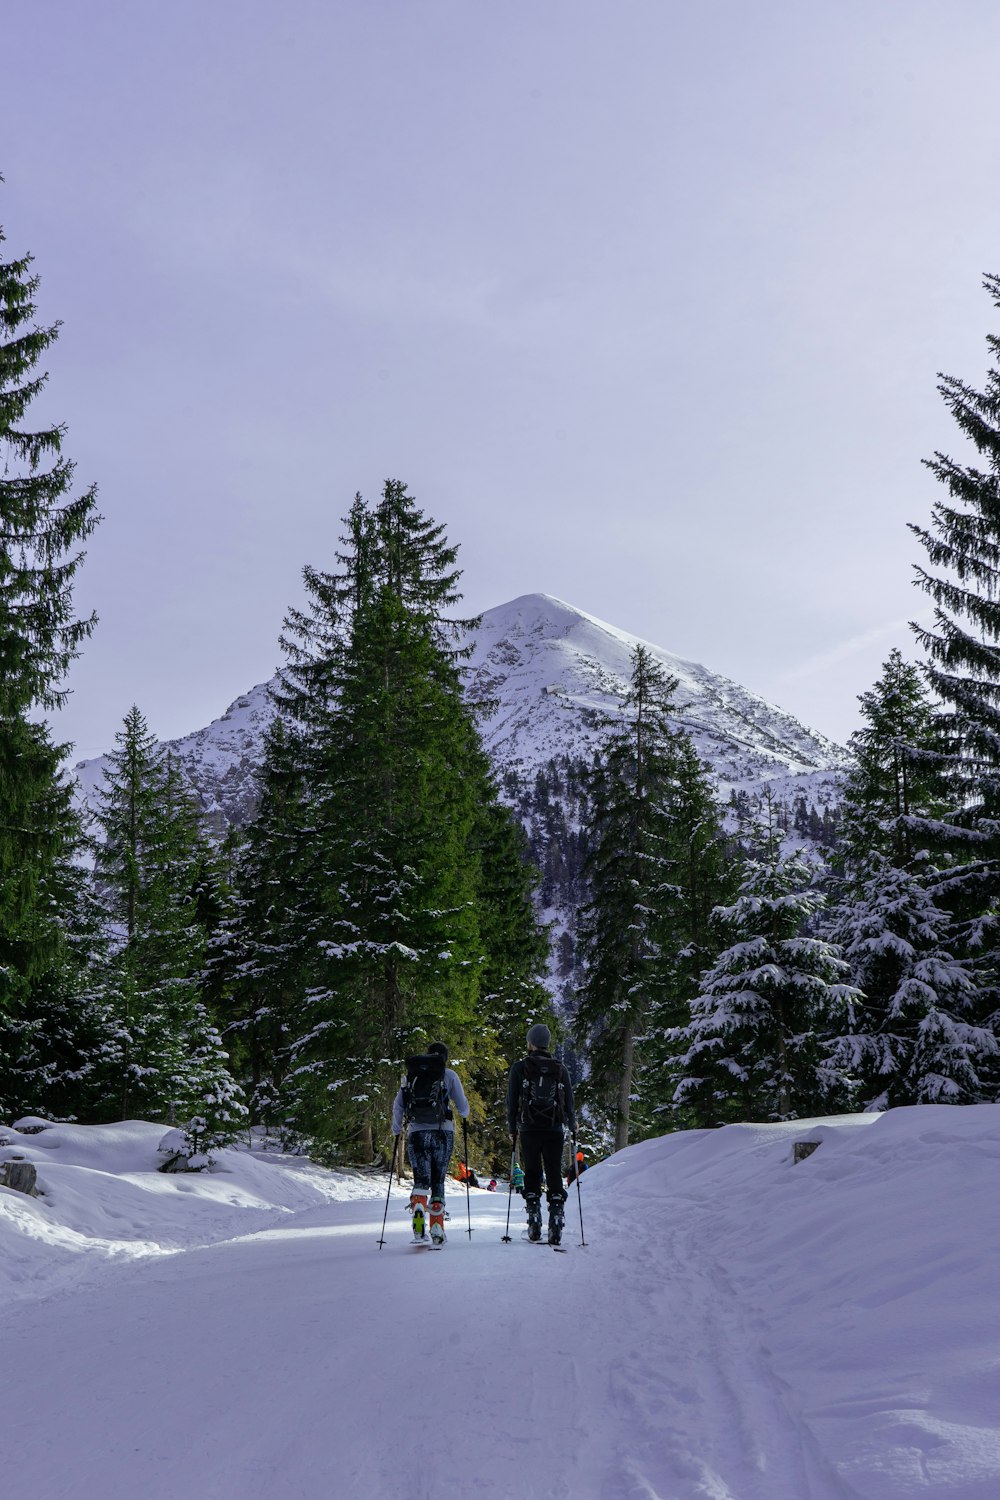 people walking on snow covered ground near trees and snow covered mountain during daytime